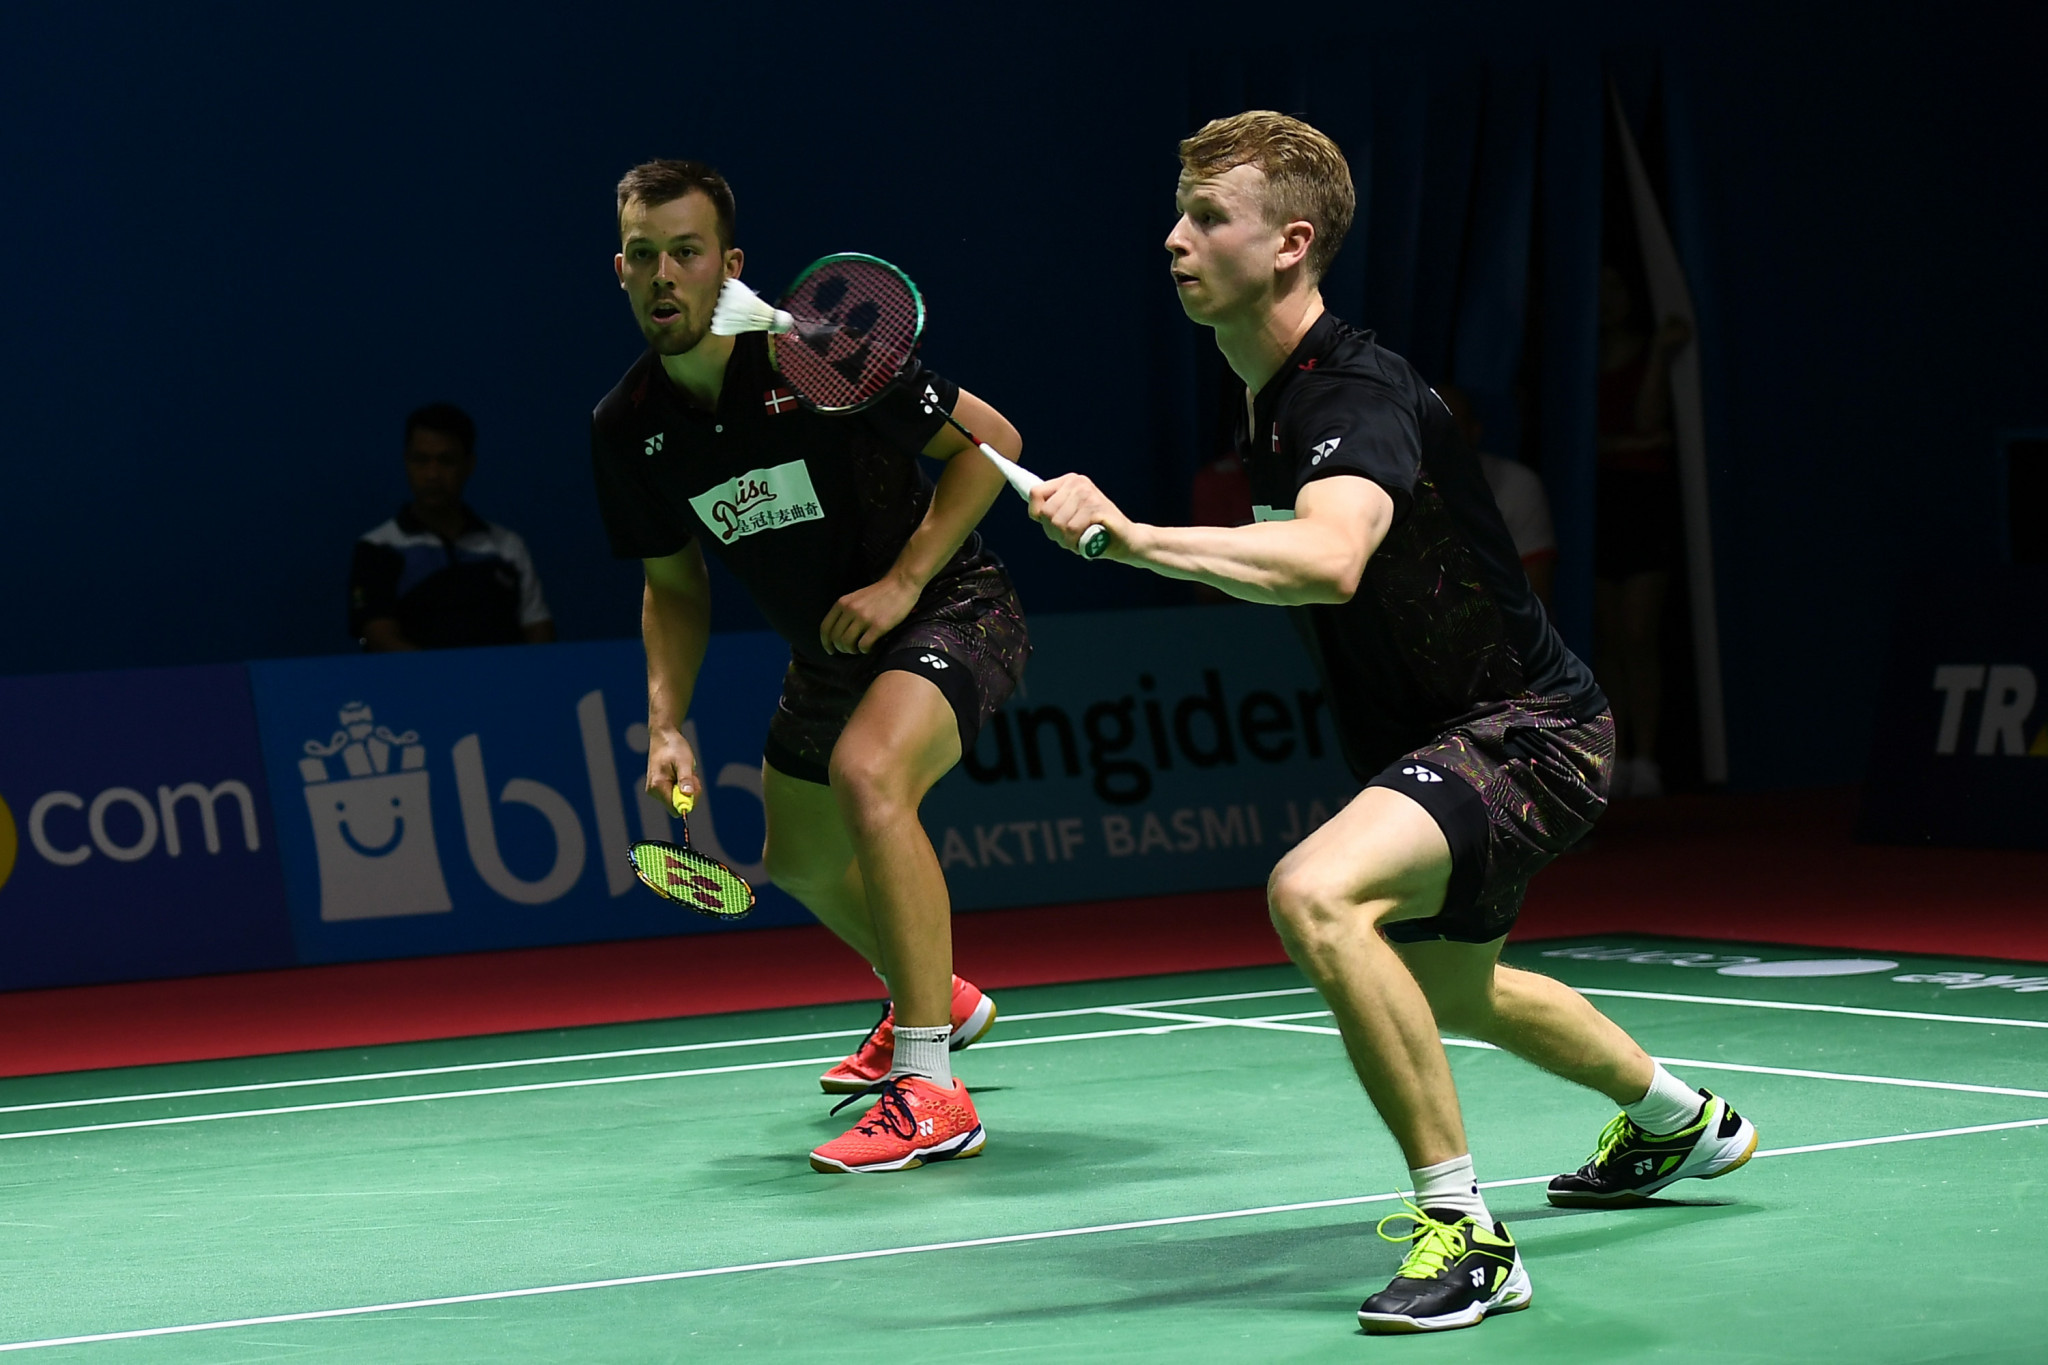 Kim Astrup and Anders Skaarup Rasmussen secured the crucial point for Denmark in the European Mixed Team final ©Getty Images